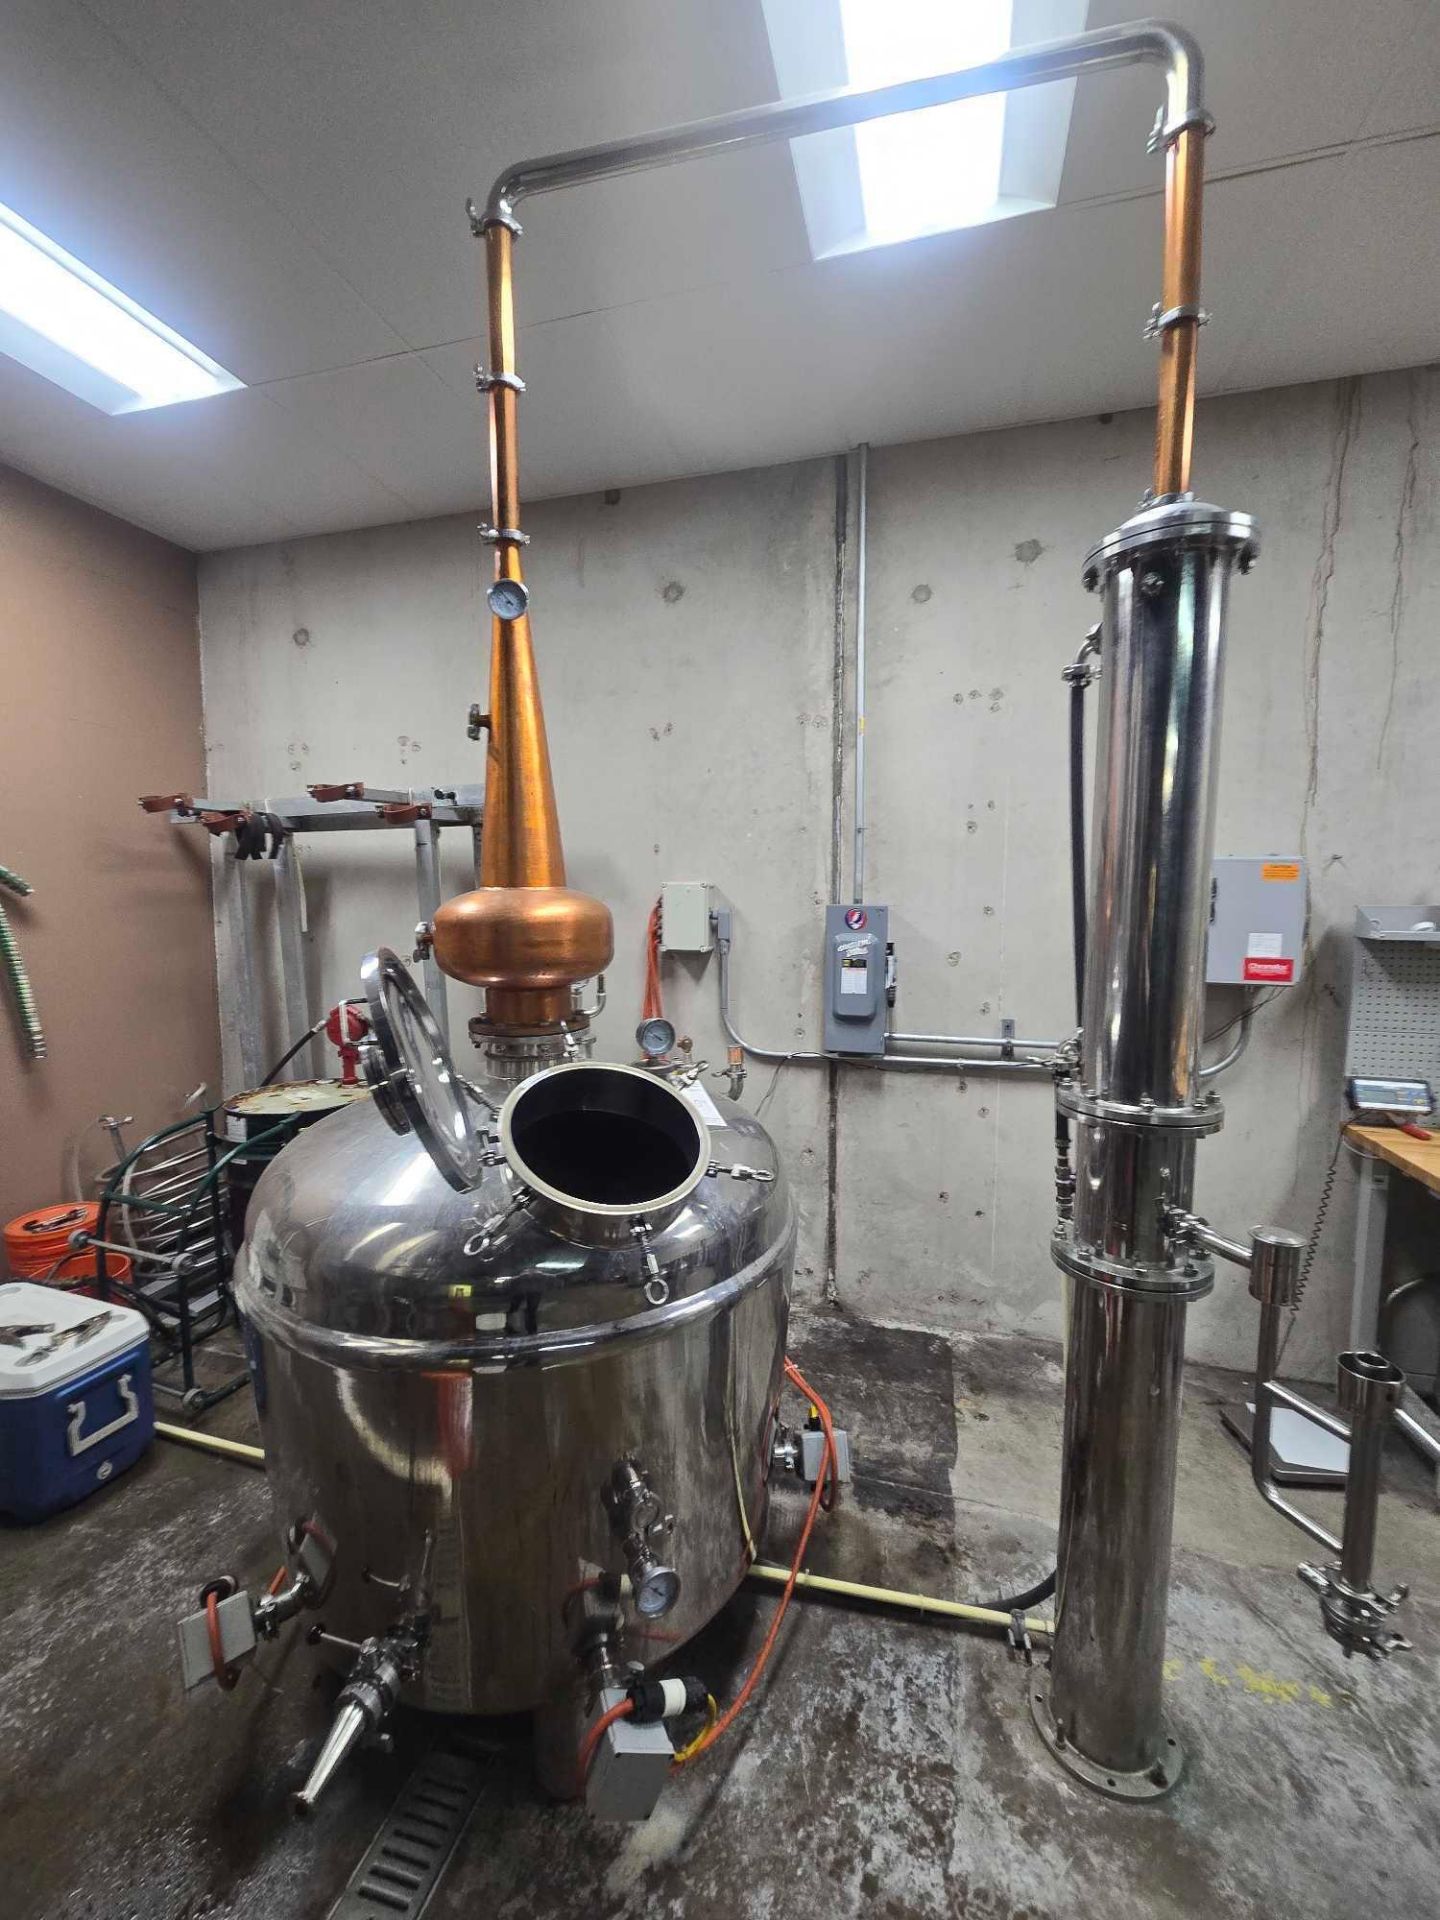 STAINLESS STEEL ELECTRIC POT STILL W/ COPPER ALEMBIC & CONDENSER APPROX. 300 GALLONS - Image 2 of 23